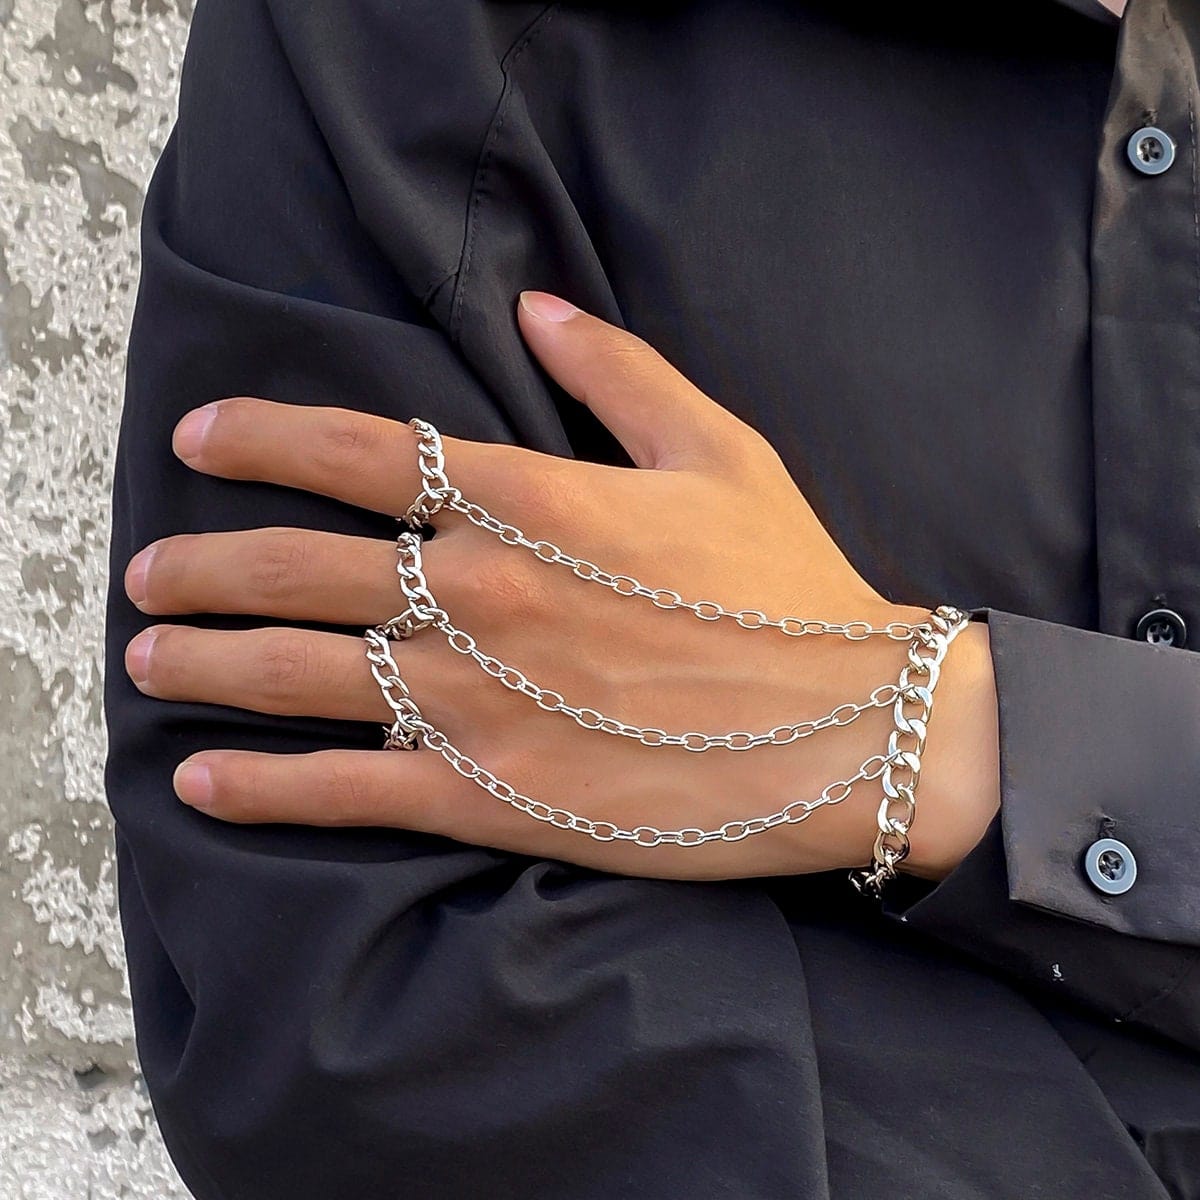 SIMPLY SEXY Hand Chain - Criscara